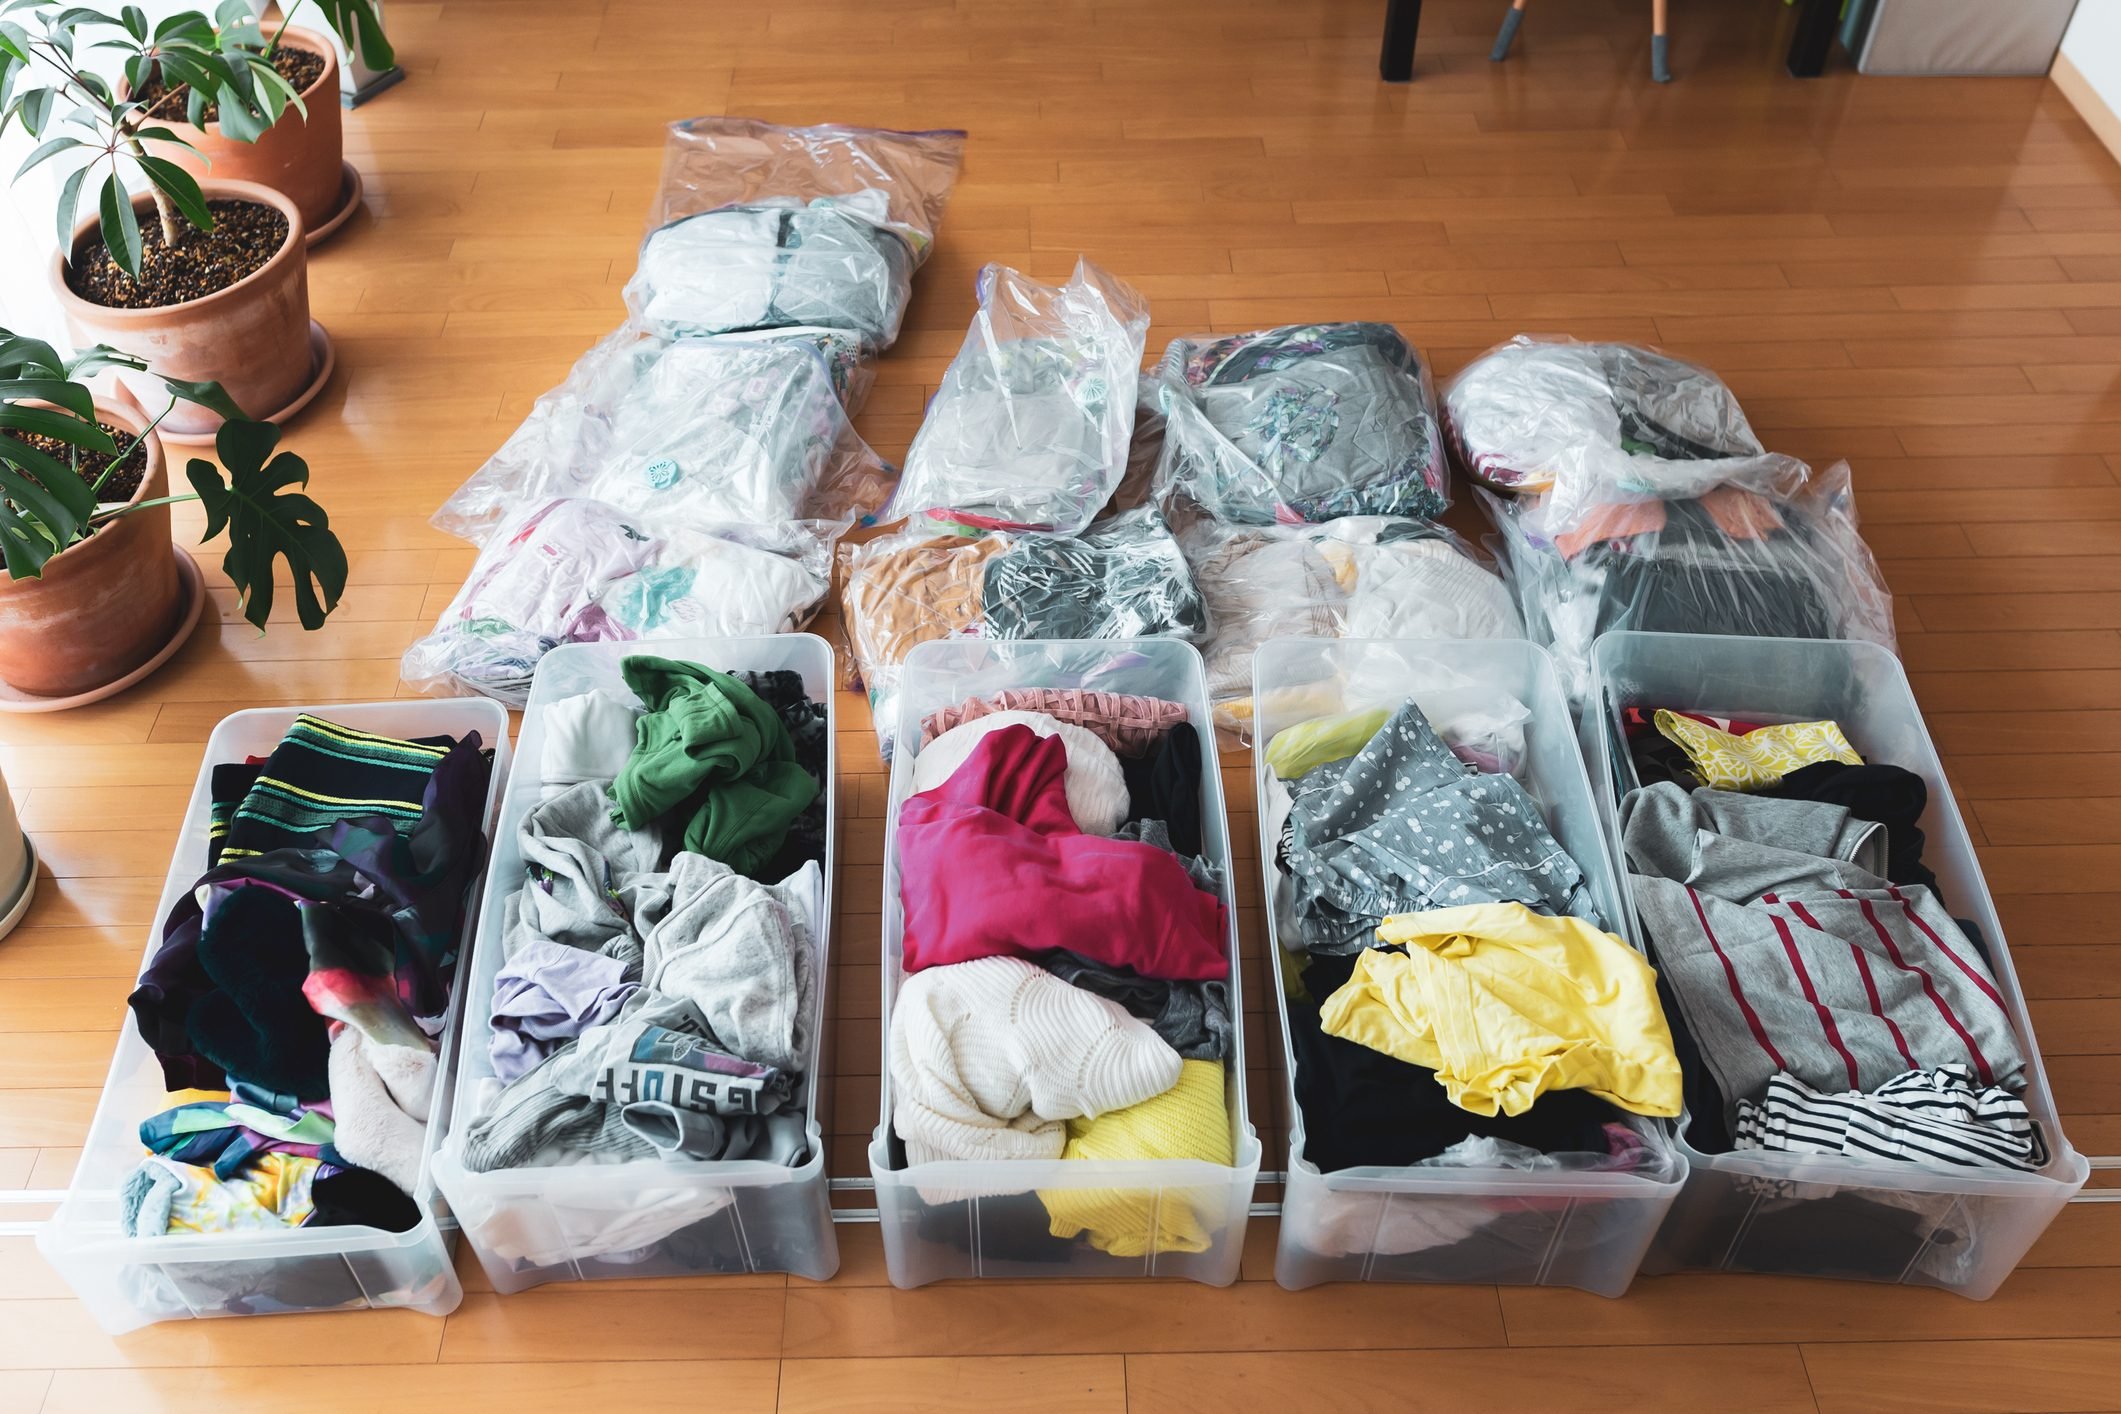 Professional Organizers Share Their Ultimate Speed-Cleaning Routines